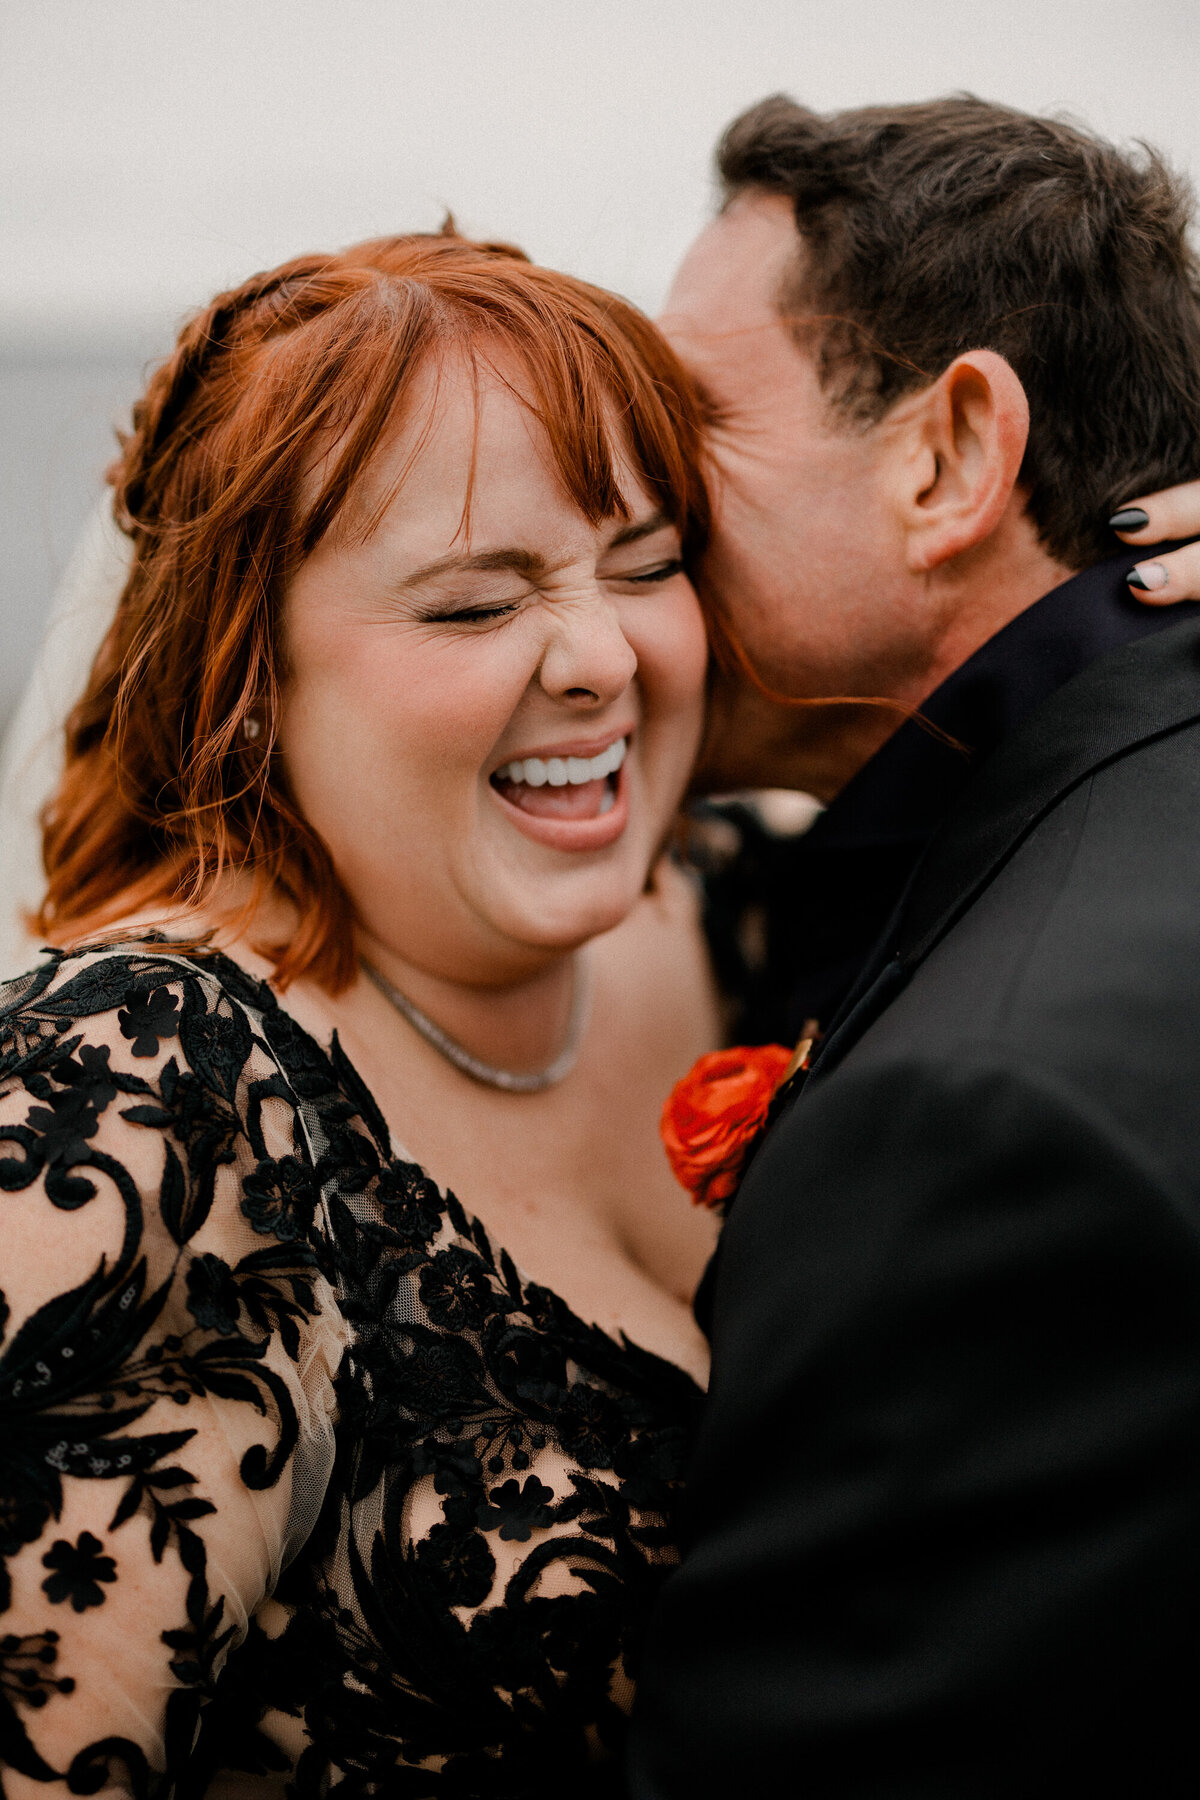 bride-and-groom-laughing-photo